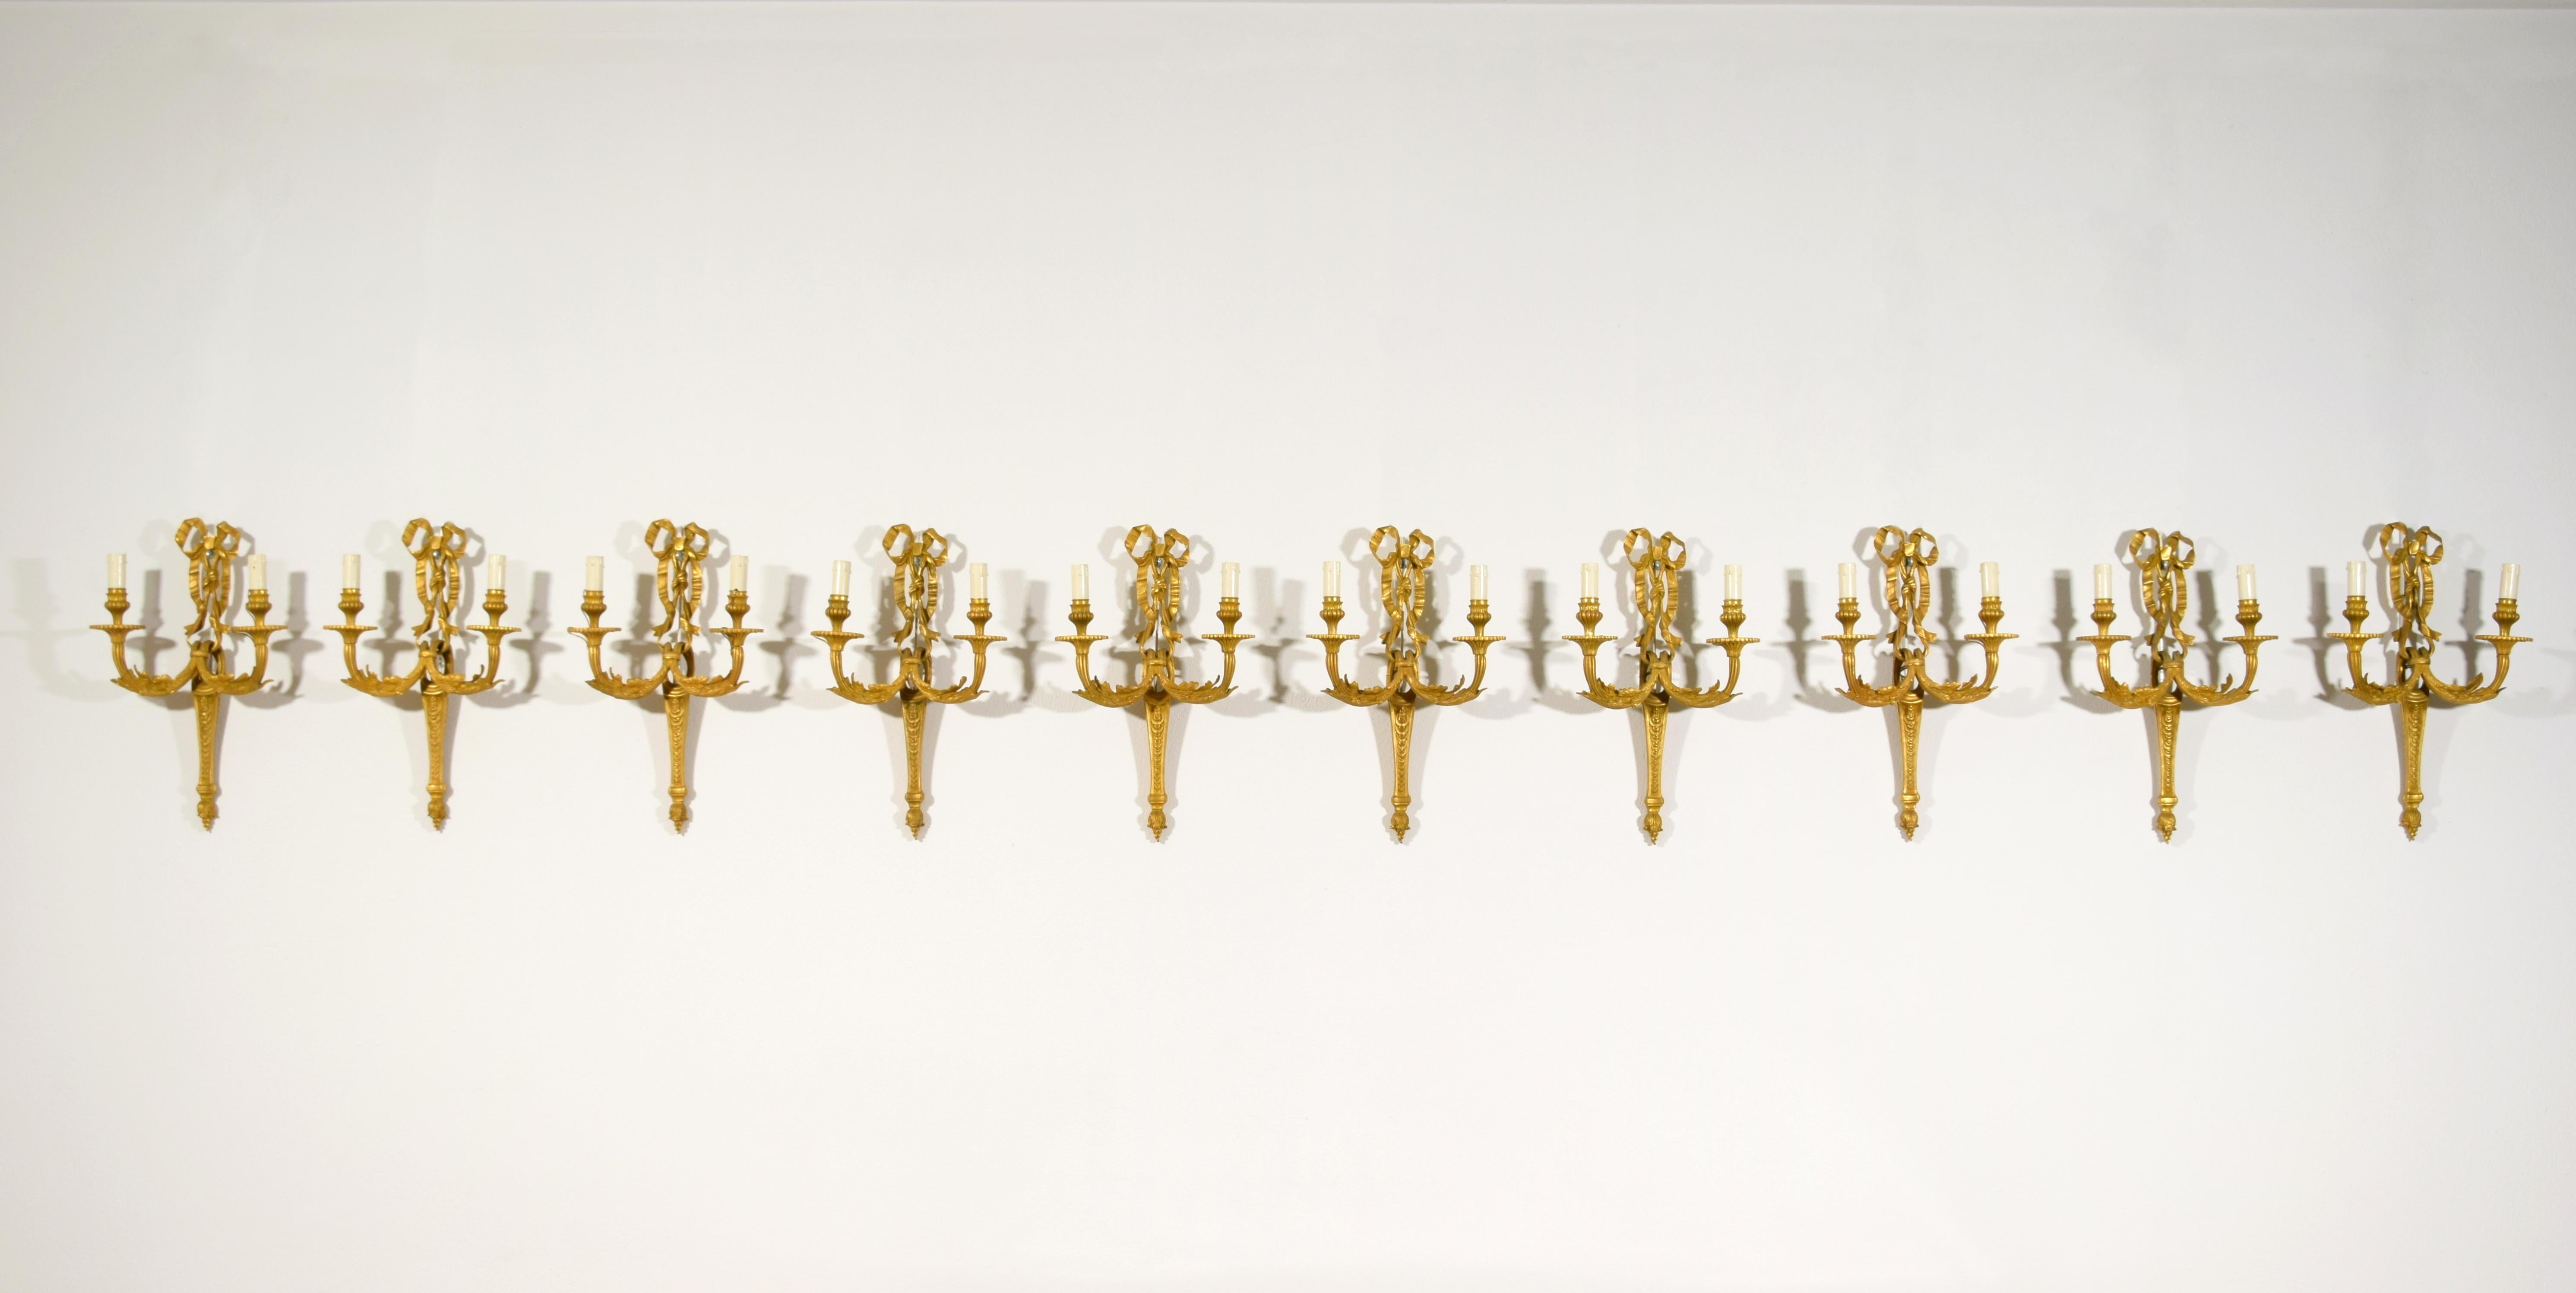 20th century, Ten France Two-light Gilt Bronze Sconces
These elegant sconces were made in France in the early twentieth century, according to a characteristic design of the Louis XVI era.
Entirely in finely chiselled gilded bronze, they have a